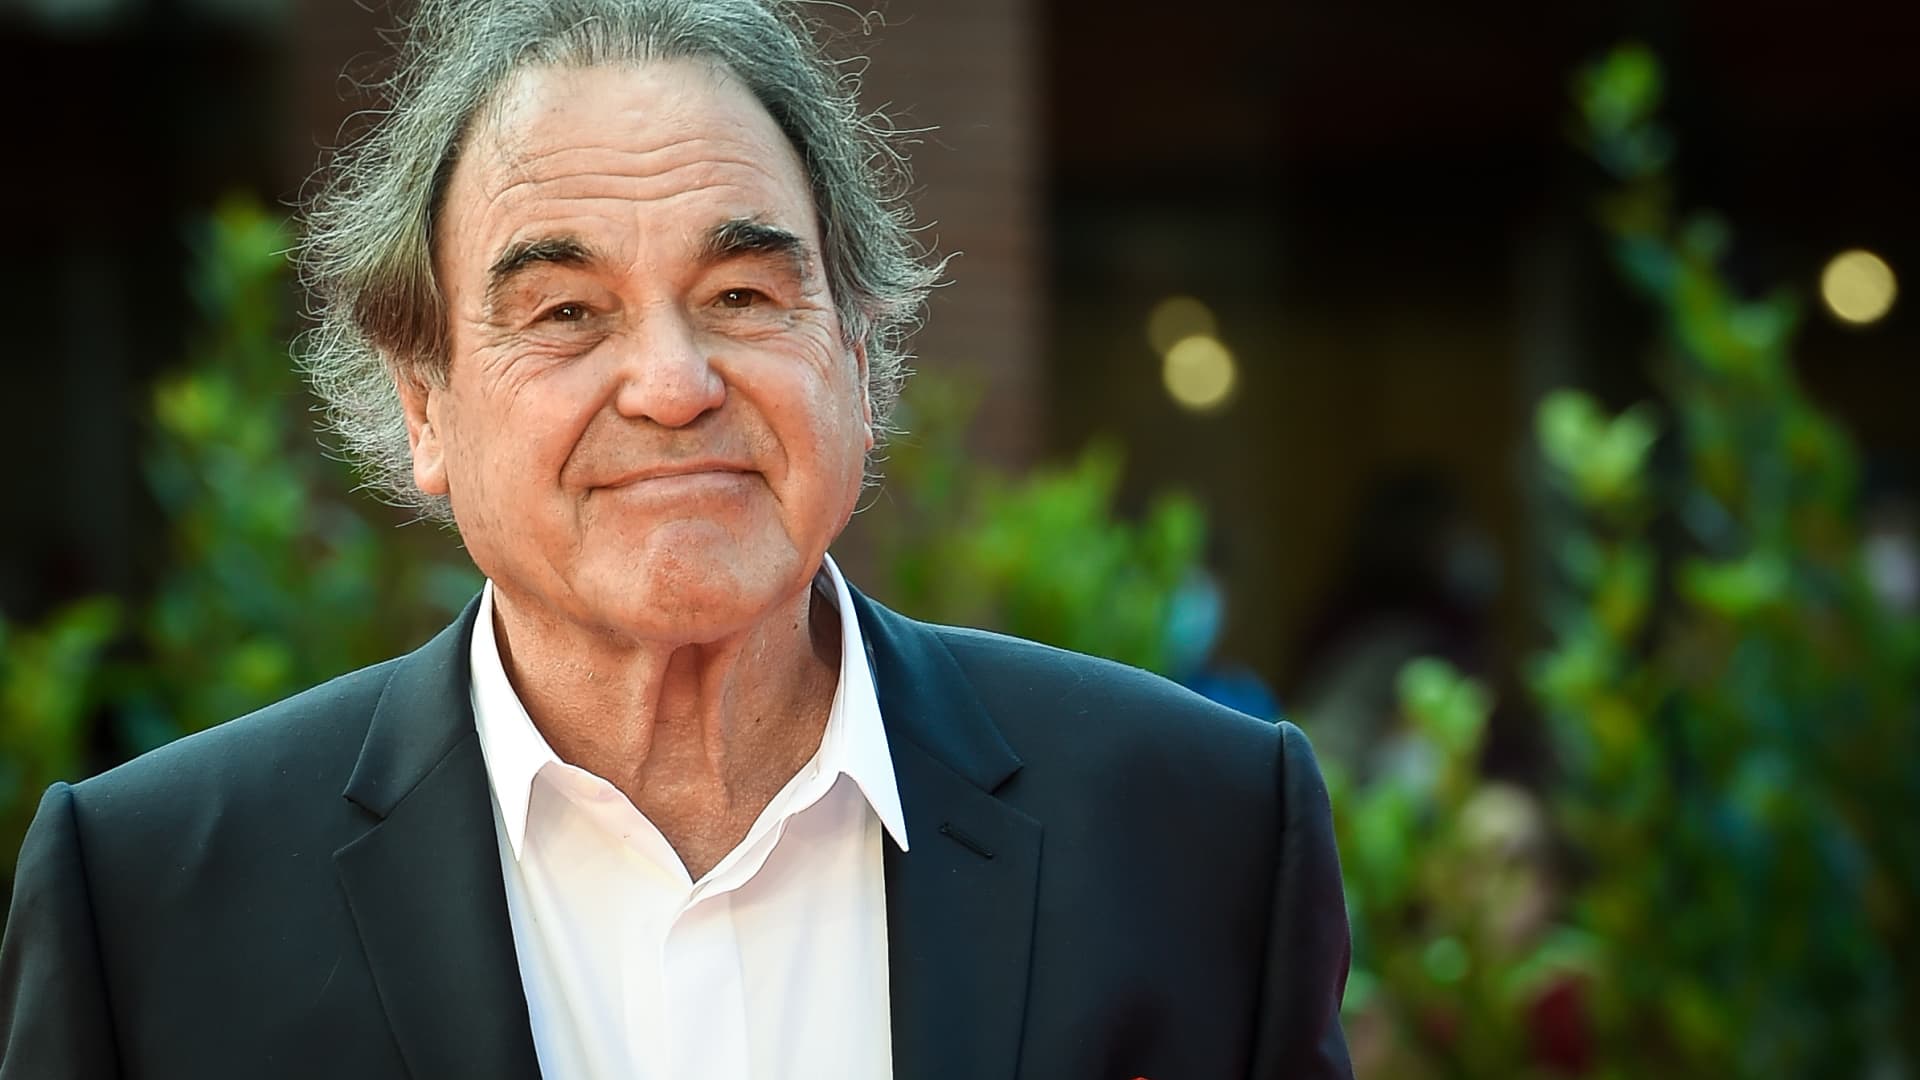 Filmmaker Oliver Stone slams environmental movement over 'destructive' actions on nuclear